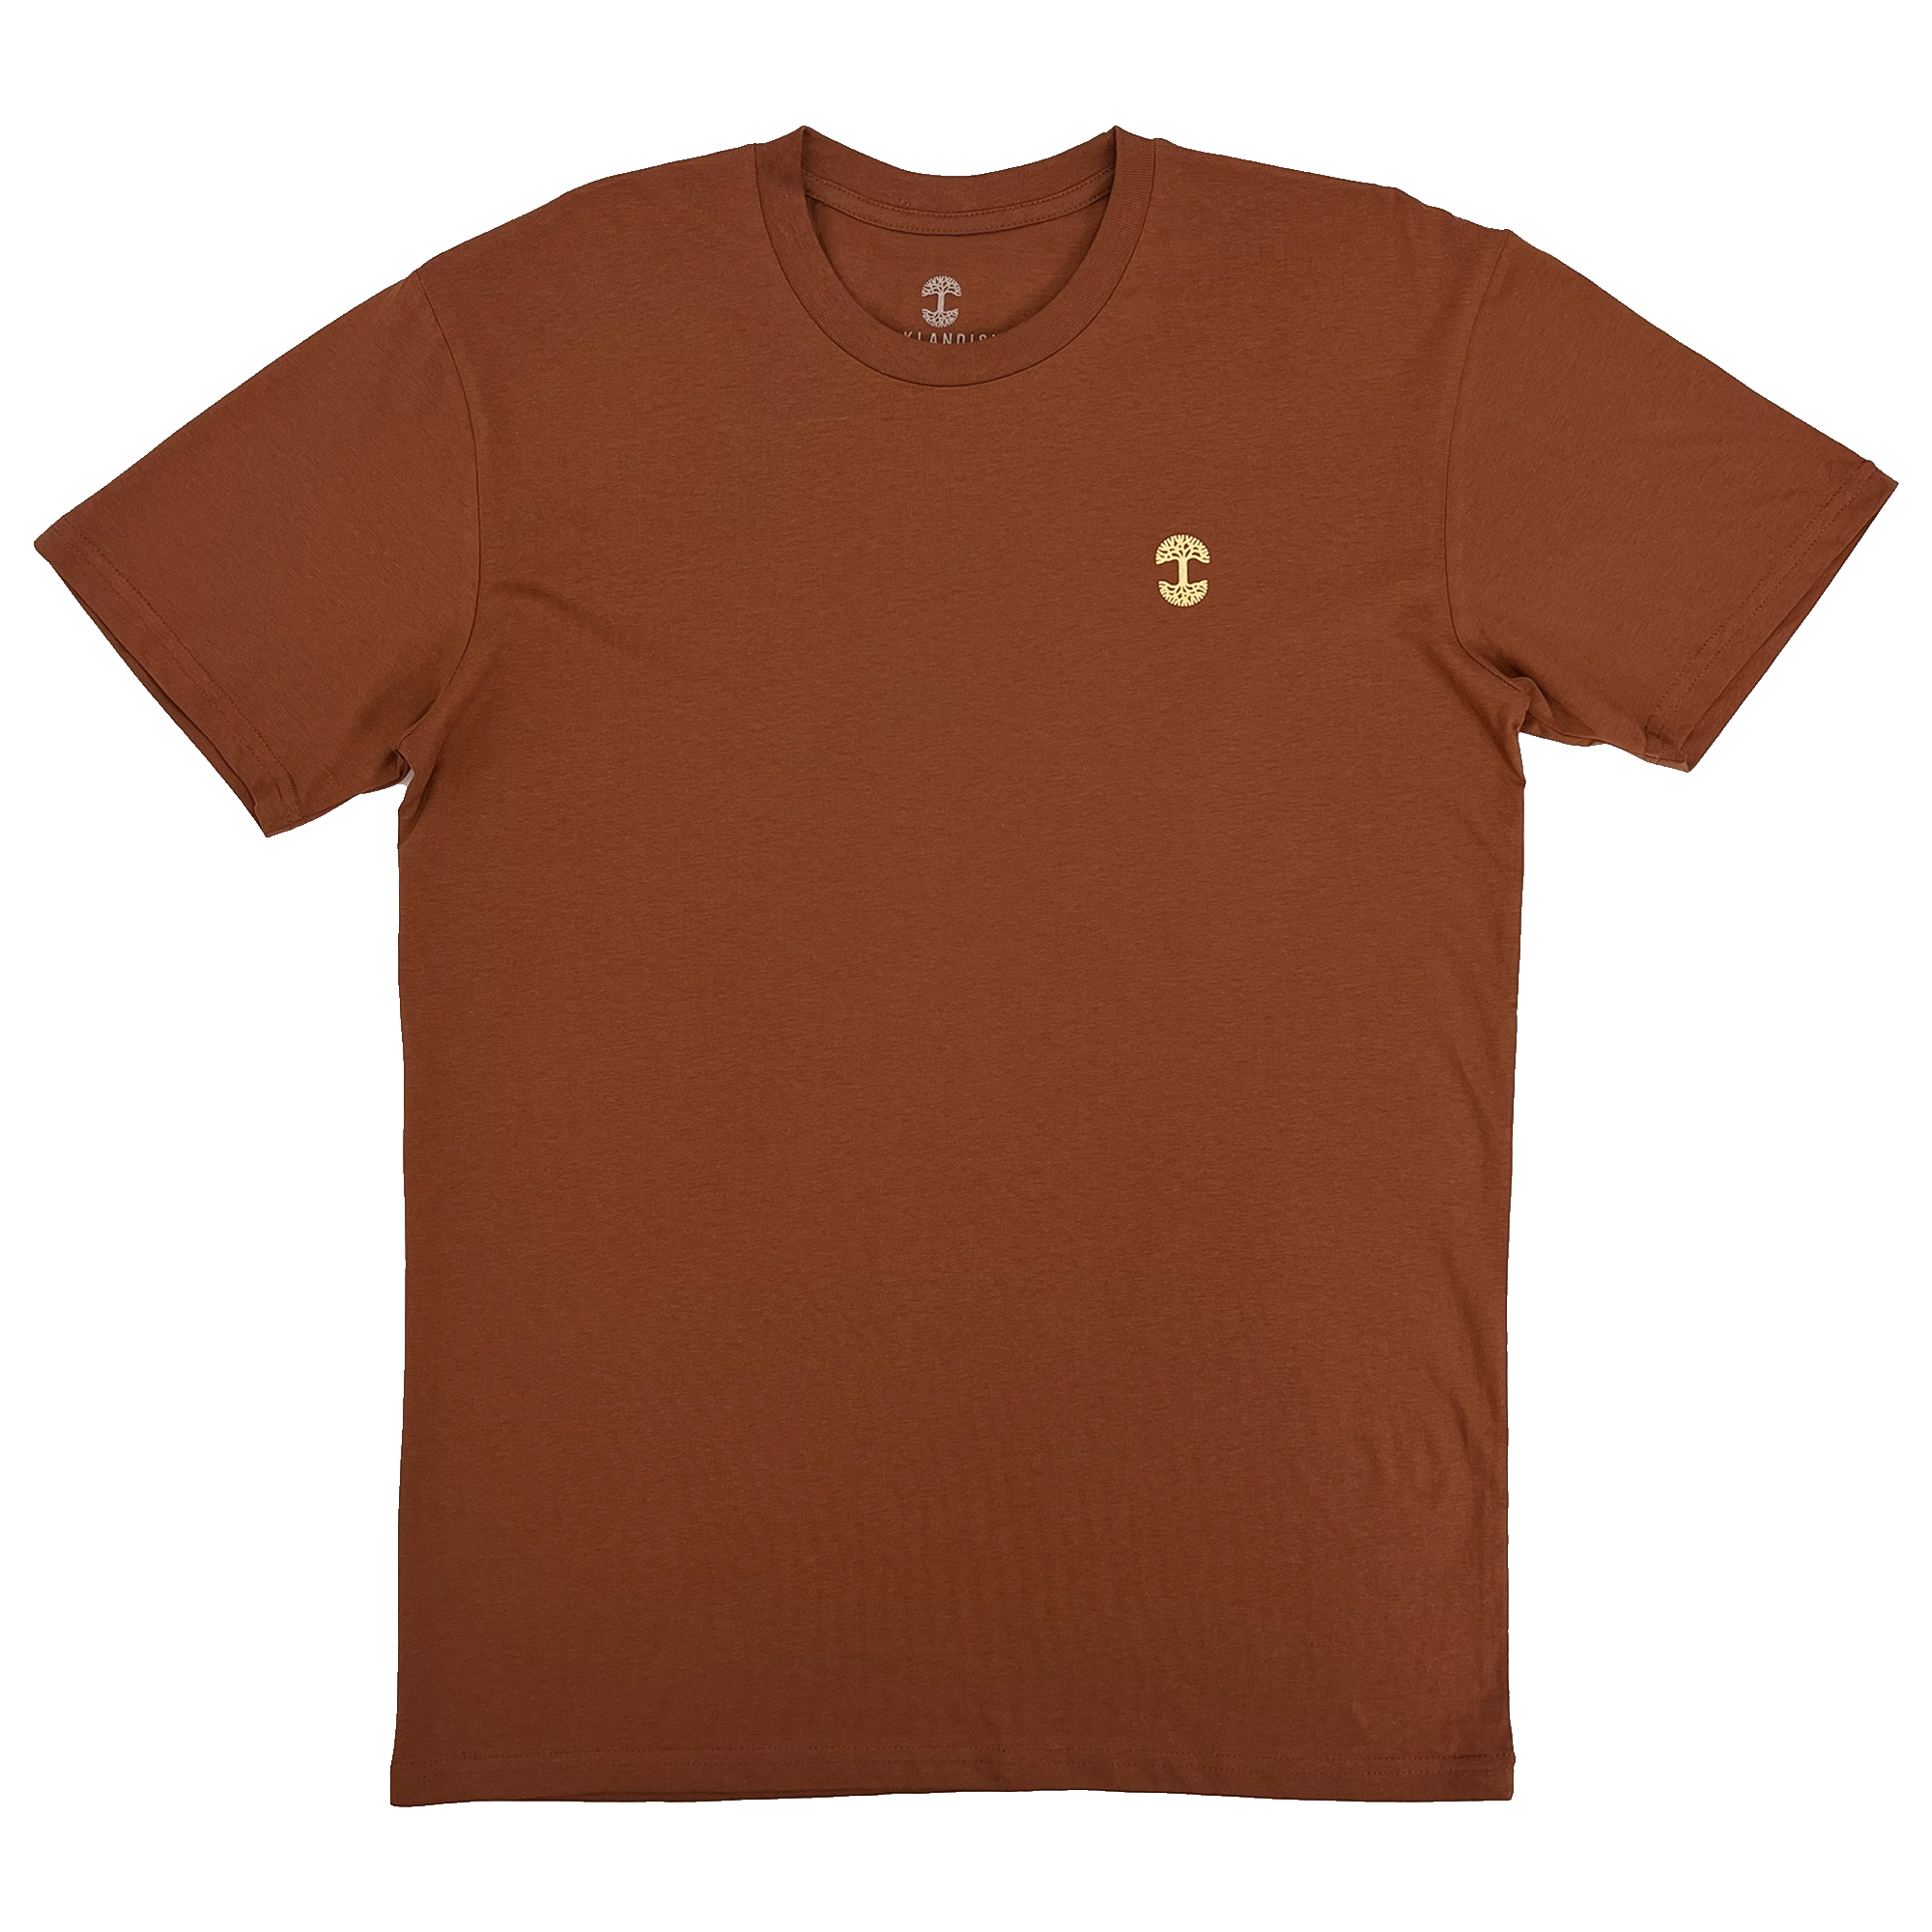 Clay-colored t-shirt with yellow Oaklandish tree logo on front chest.